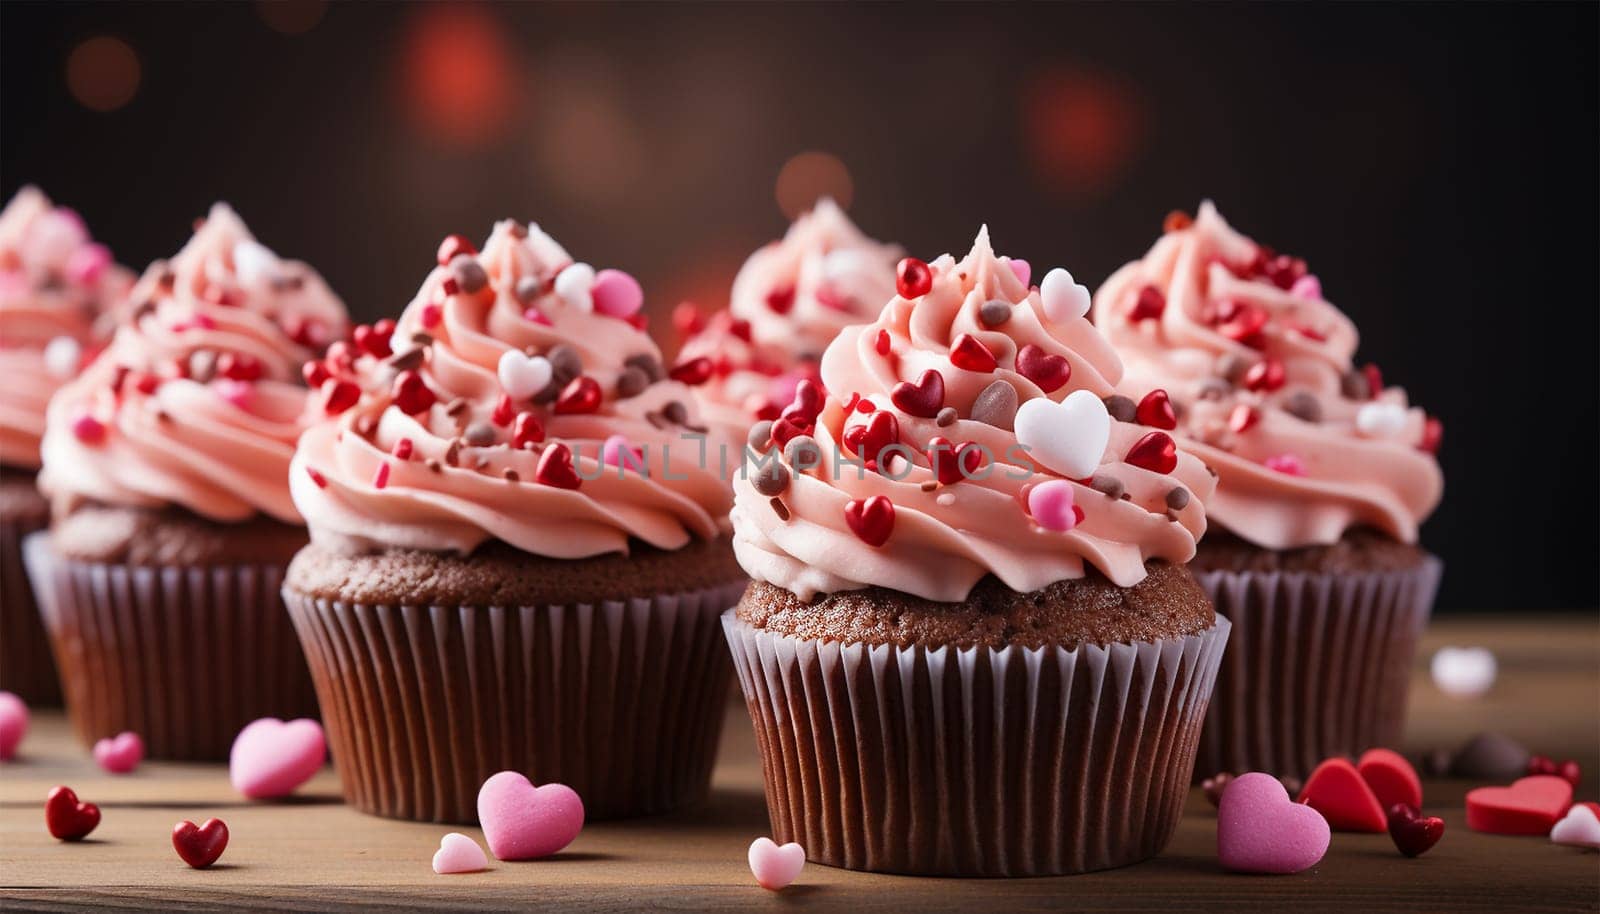 Festive cupcakes with a heart inside for Valentine's Day decorated with sprinkles with hearts. Love concept. Selective focus. Delicious sweets Valentine's Day by Annebel146